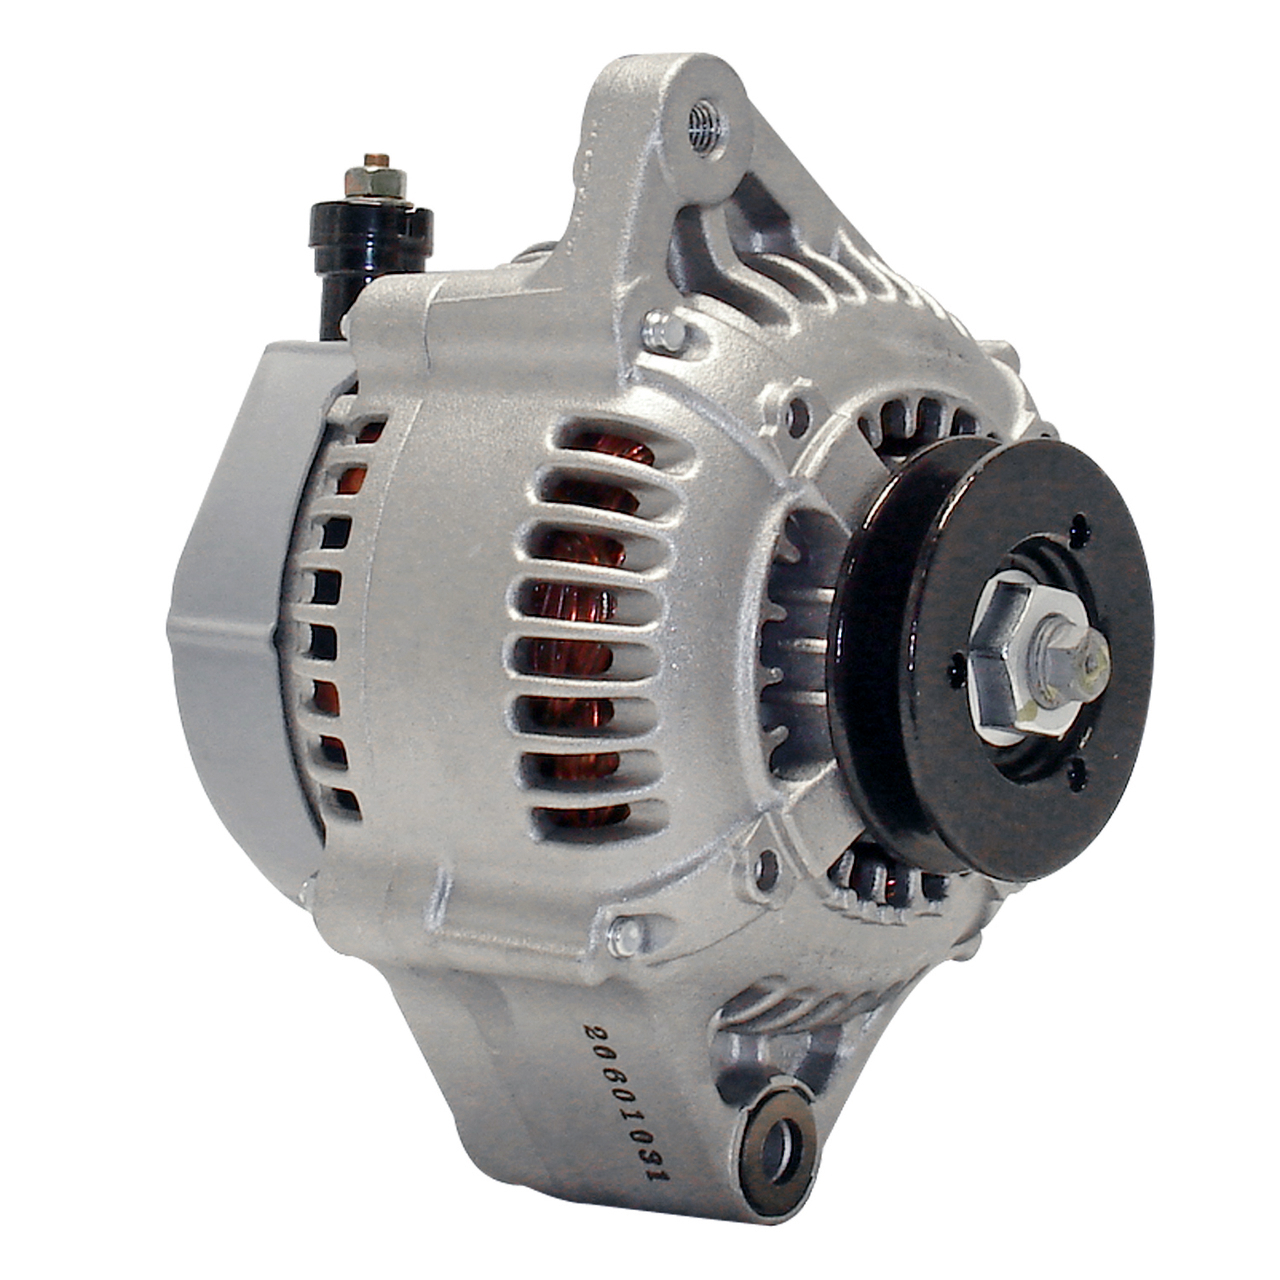 Details about   For Toyota 4Runner 93-95 ACDelco 334-1183 Professional Remanufactured Alternator 